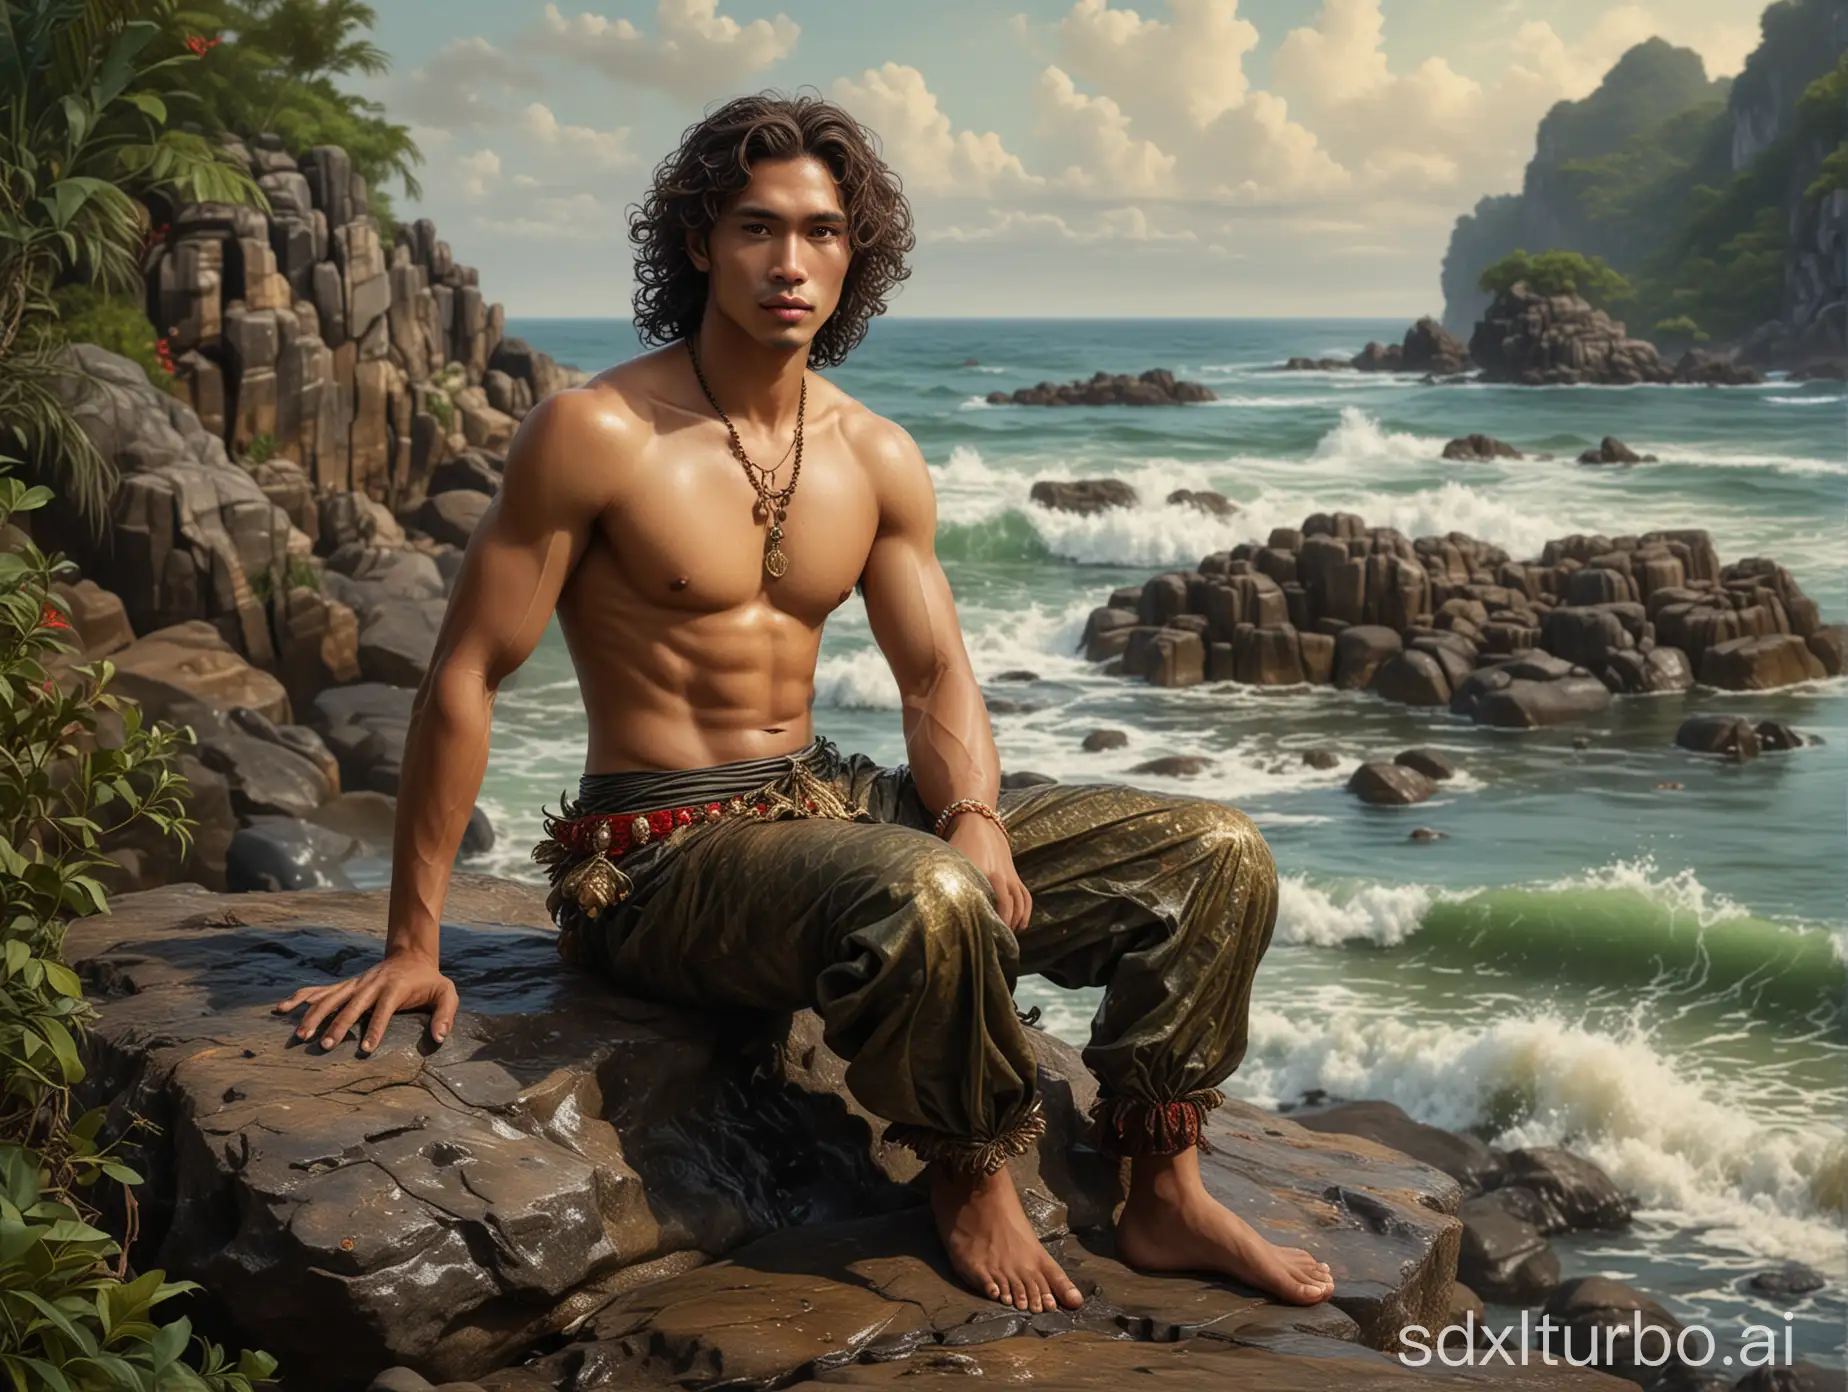 A full-body shot of a Vietnam-Borneo descent male mermaid with shoulder-length wet dark brown wavy hair, athletic body, wearing traditional accessories, sitting on a rock, with a background of a seashore, in the style of an oil painting.